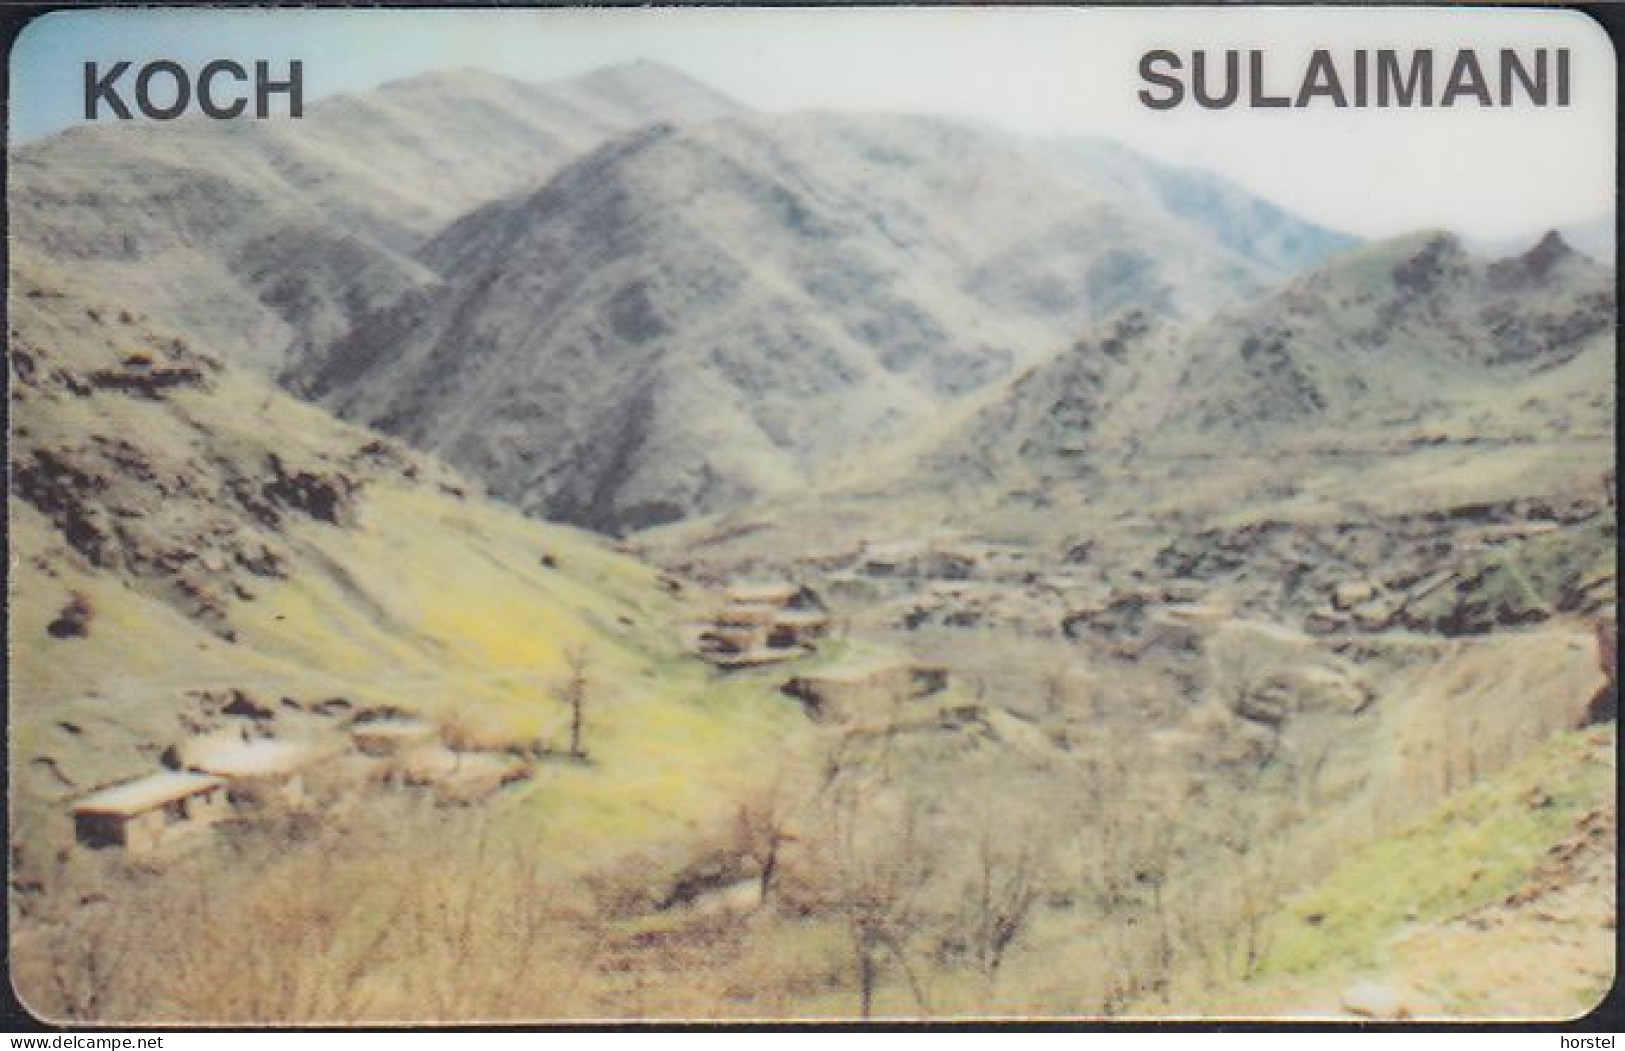 Norway - PPCK10-08  Prepaid Calling Card - Sulaimani - Koch - Landscape - Norvège